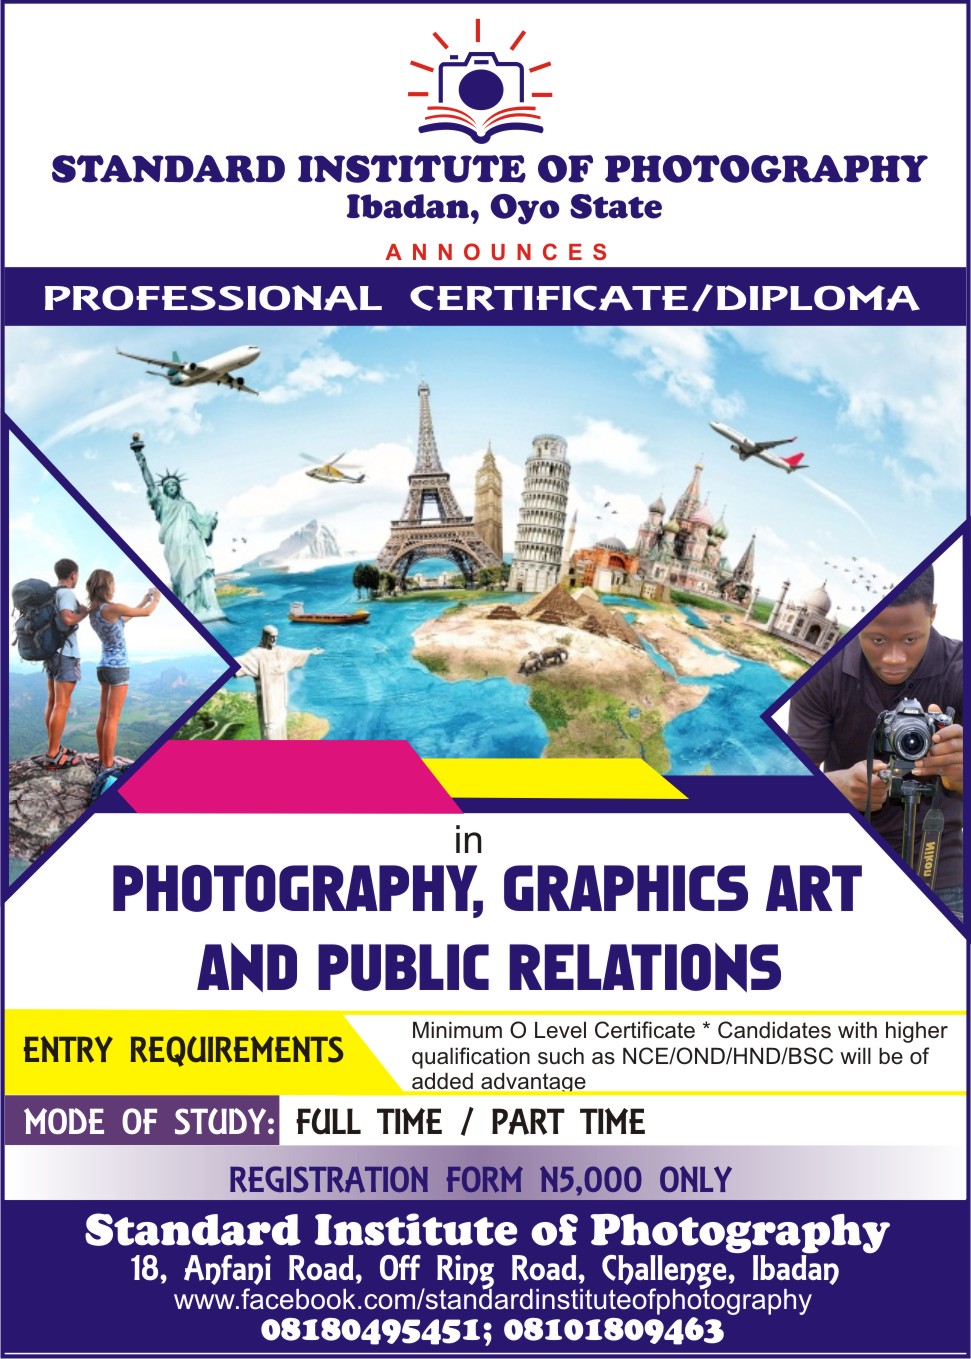 Public Relations and Photography in Ibadan